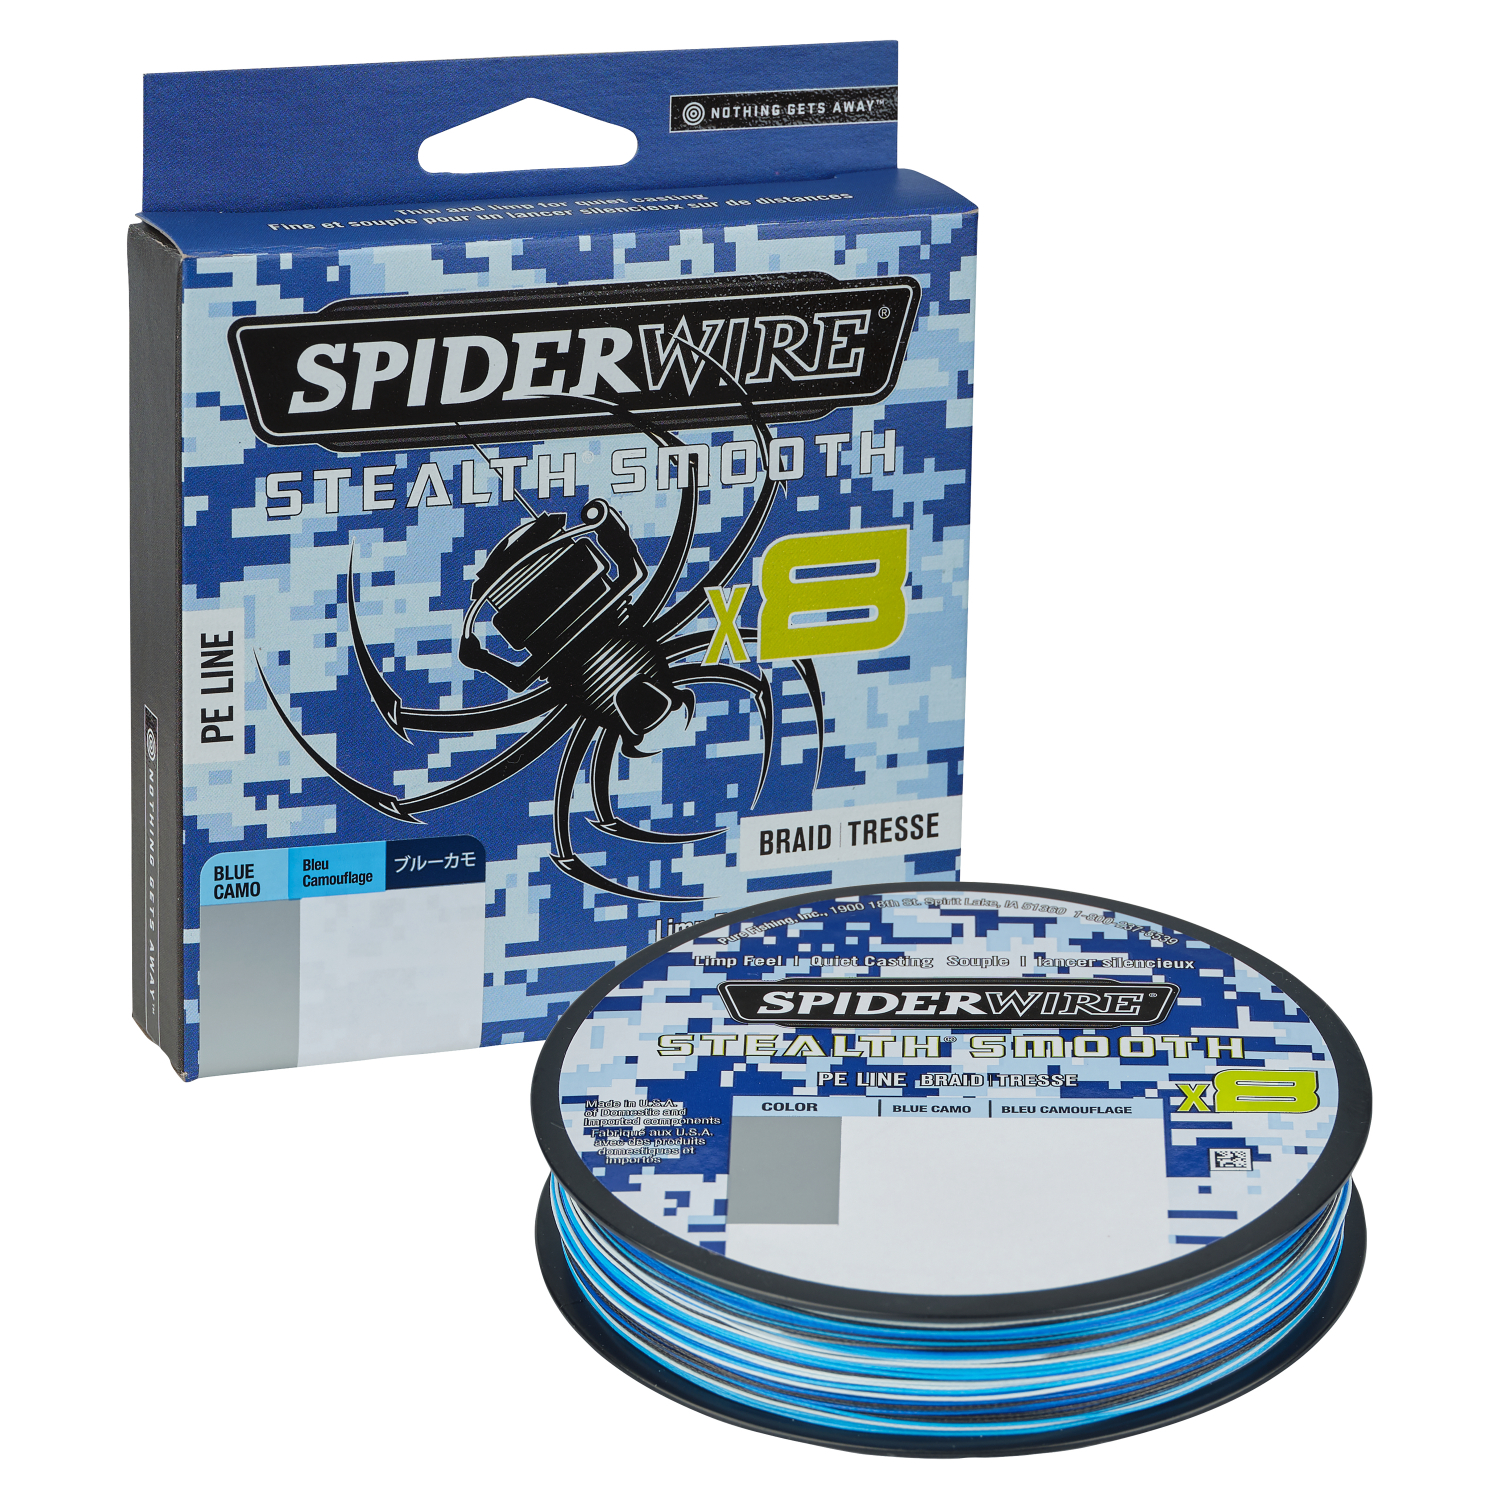 Spiderwire Stealth Smooth 8 